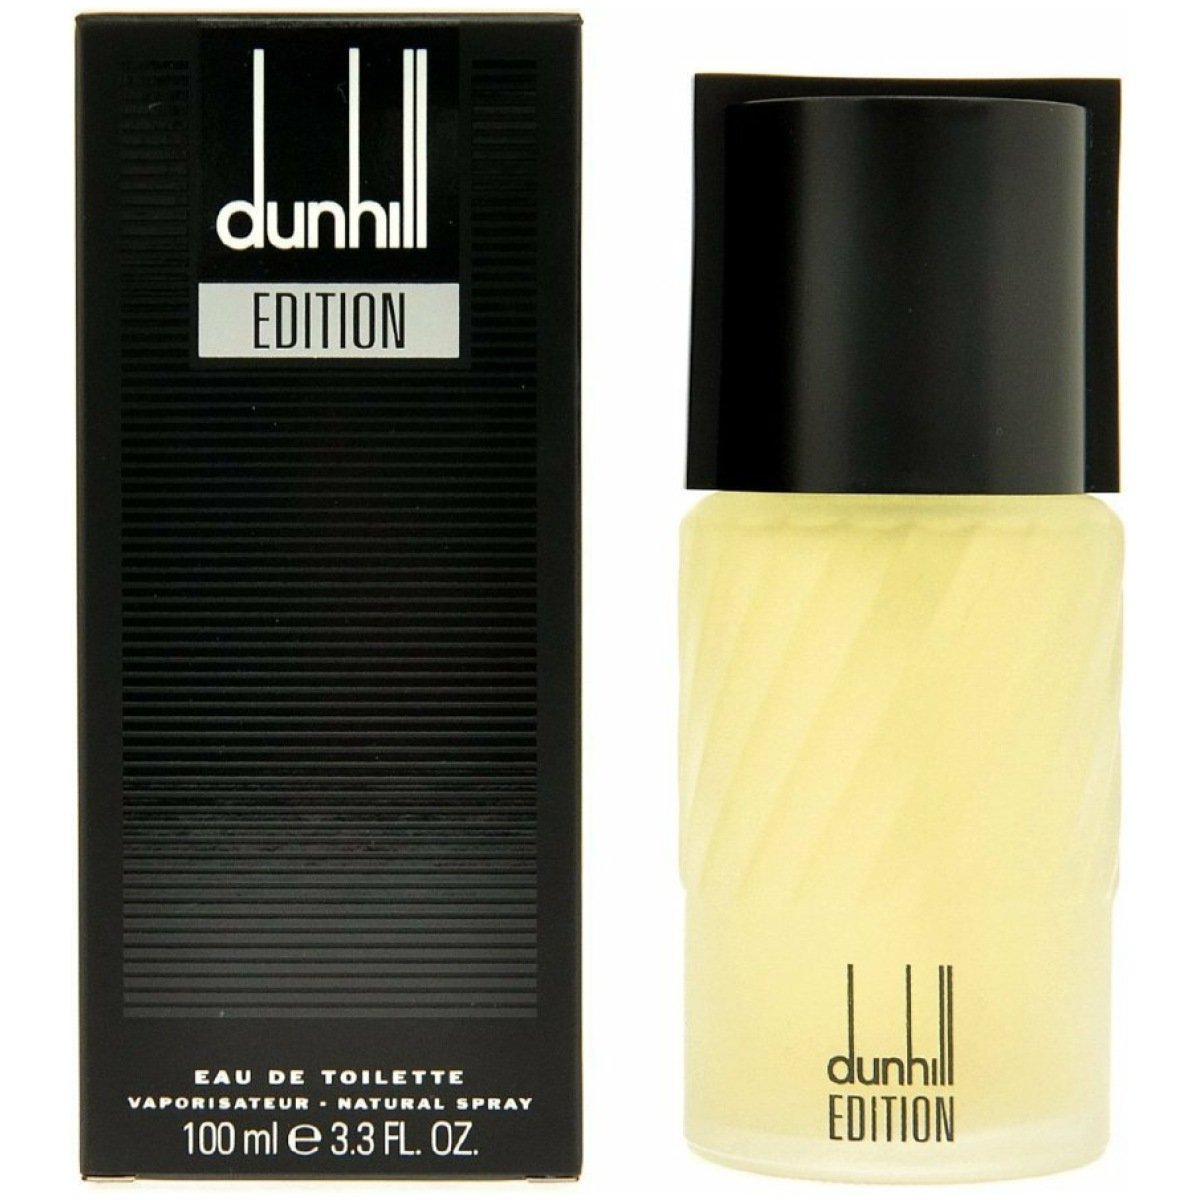 Dunhill London Edition EDT Perfume For Men 100 ml